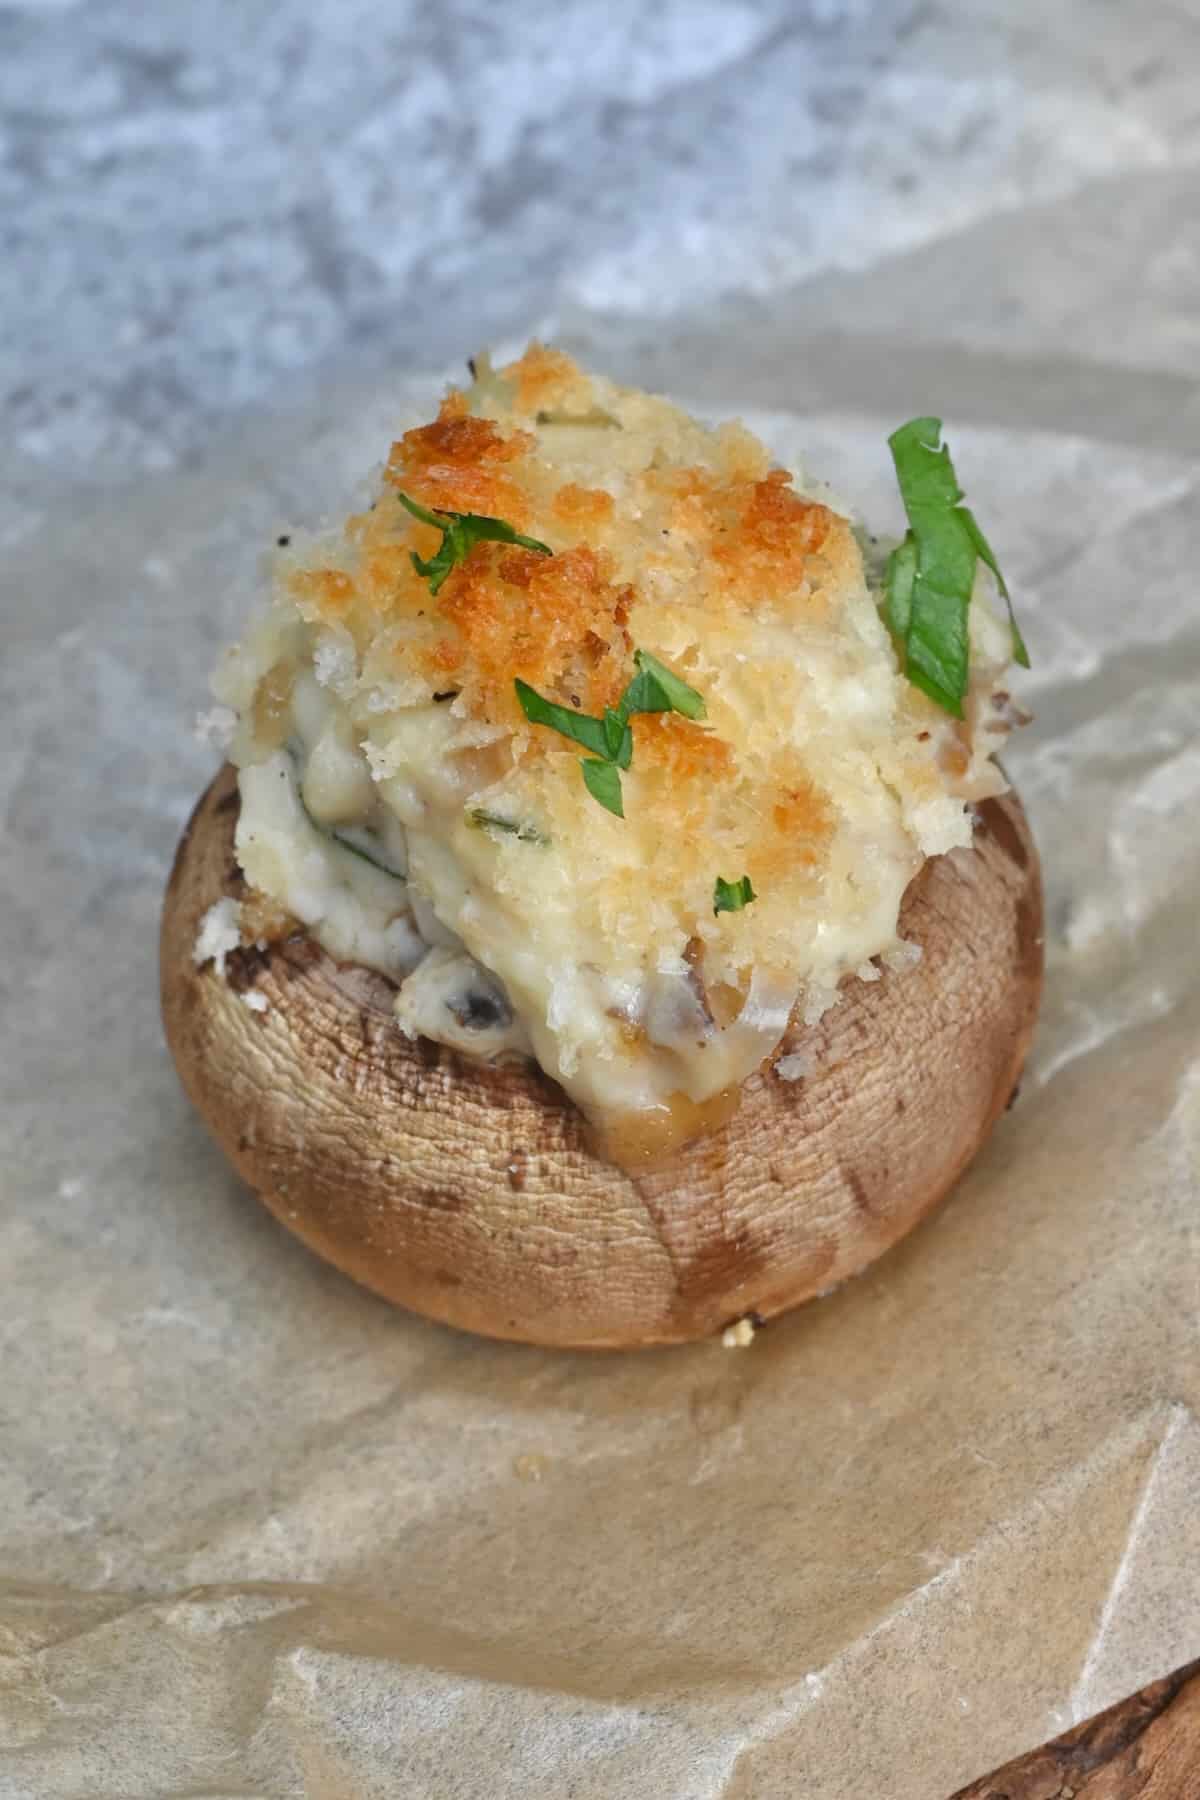 Stuffed mushroom topped with parmesan and breadcrumbs